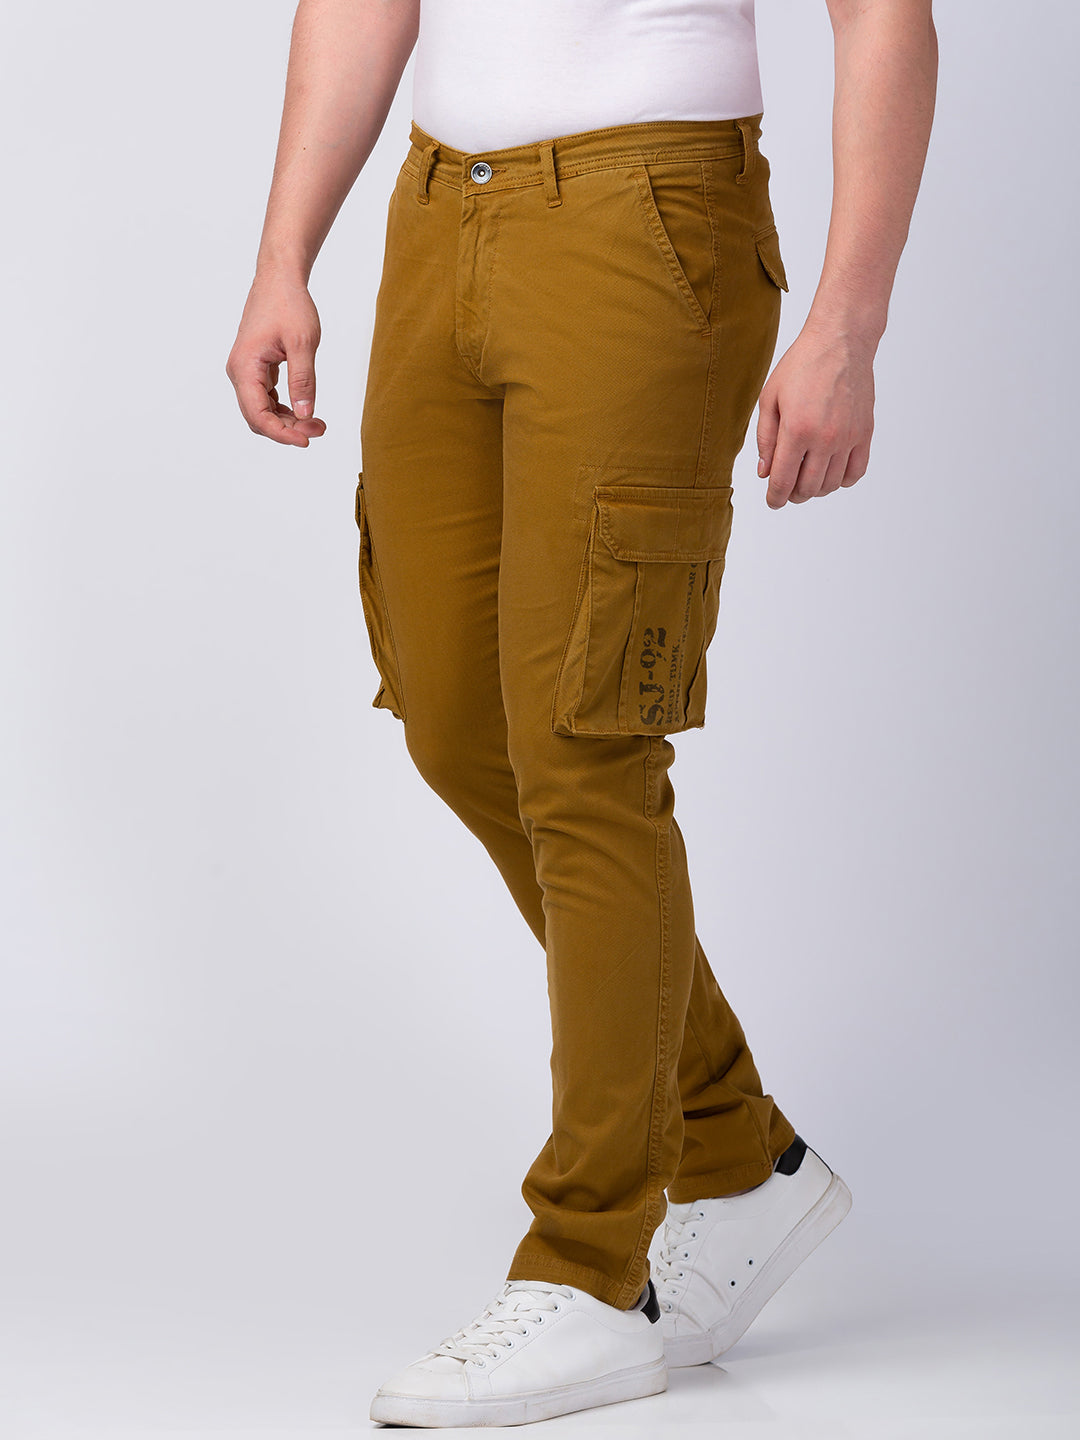 KHAKI CARGO PANT TAPERED FIT  ROOKIES